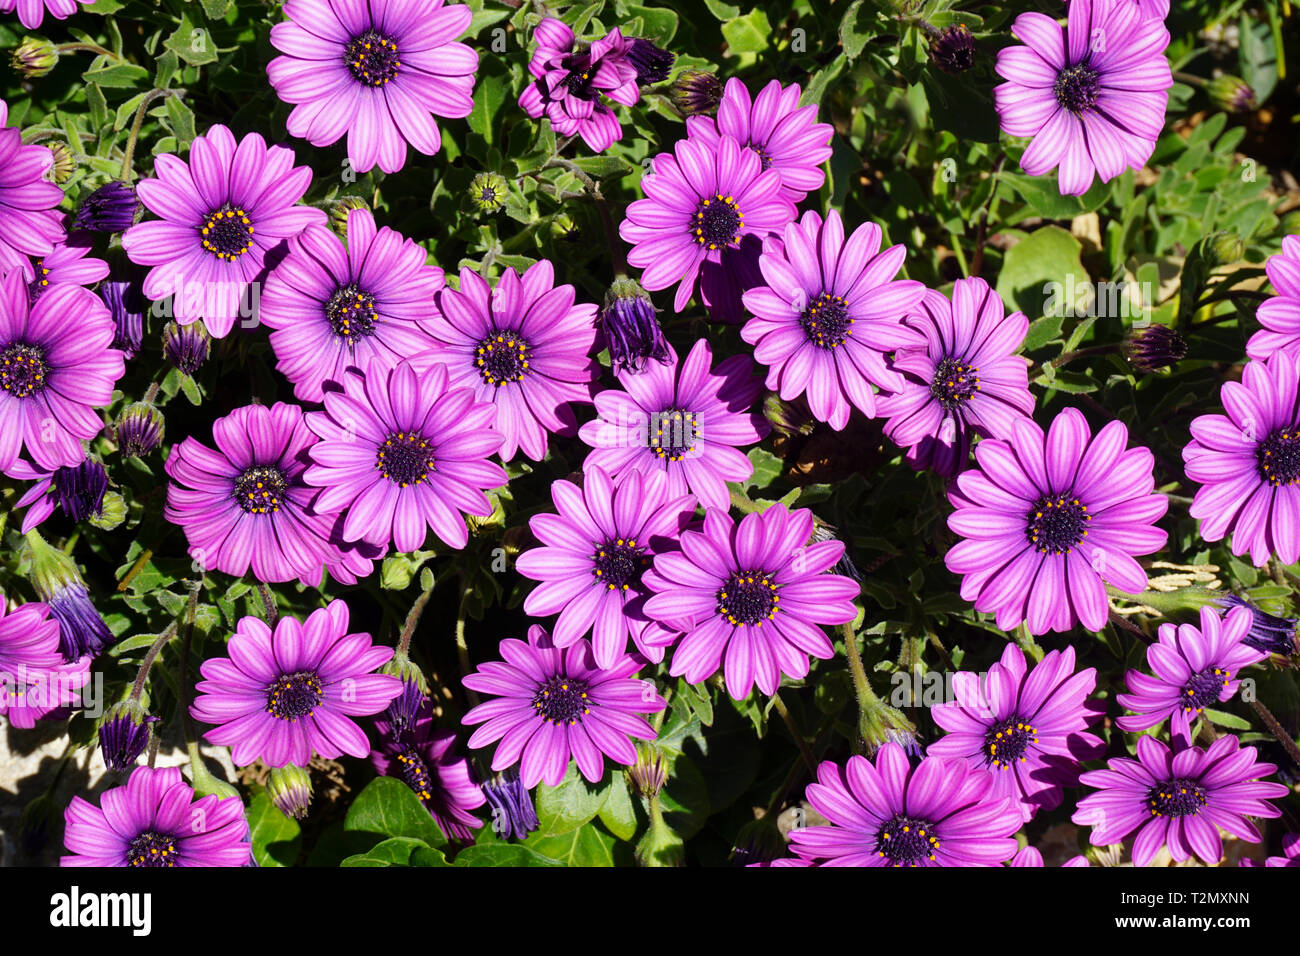 Purple flowers background, Marquerite daisy, Felicia amelloides, Lila Kapaster on sunshine and day light Stock Photo